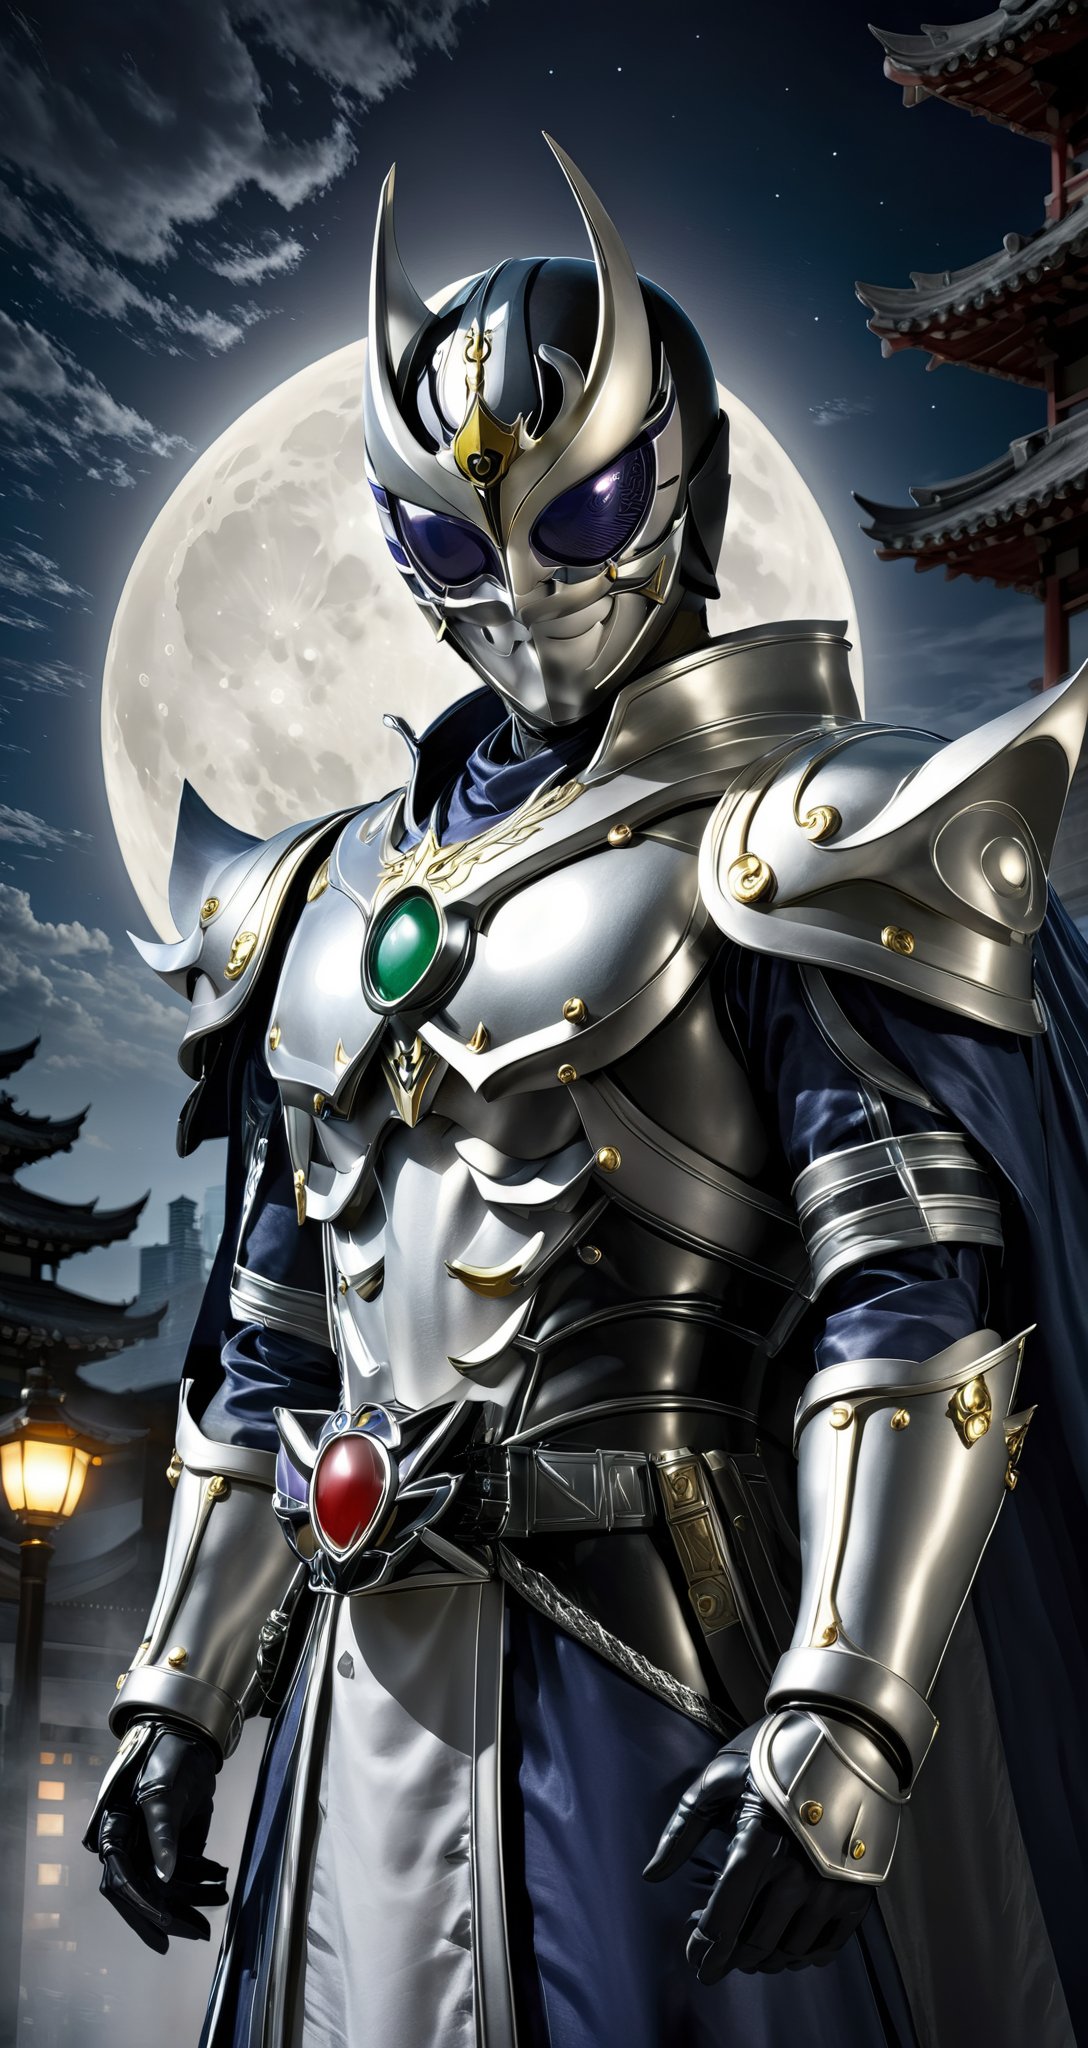 Kamen rider style, the mask guardian under the moonlight, wearing a moonlit war robe and a silver mask, quietly guarding the peace of the city. His figure looms in the night, and every appearance is accompanied by the light of justice, dispelling the darkness and guarding the light.